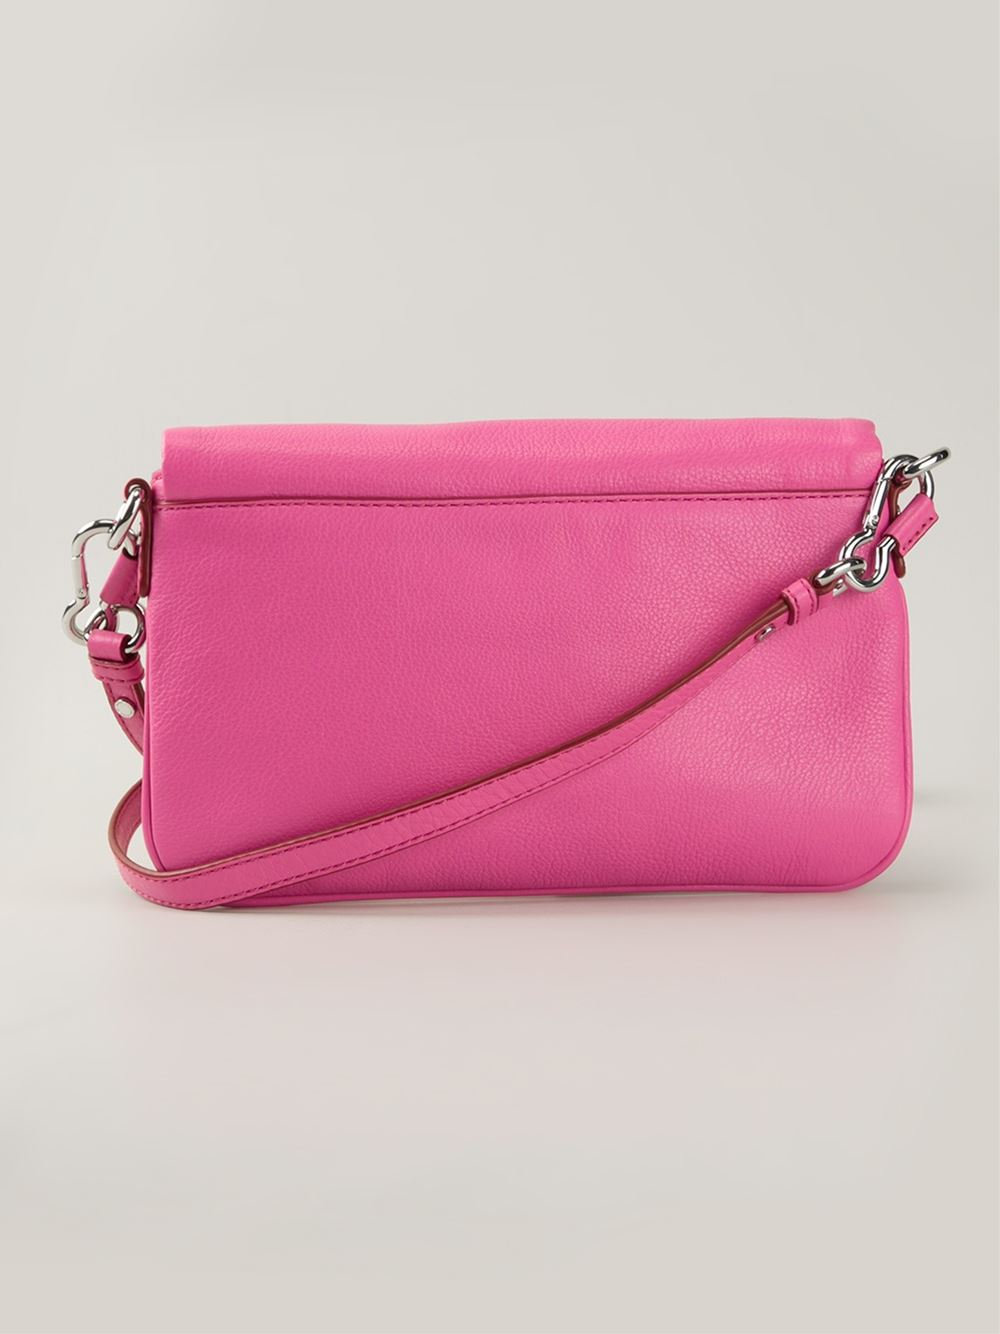 Marc by marc jacobs &#39;Too Hot To Handle Flap Percy&#39; Crossbody Bag in Pink | Lyst